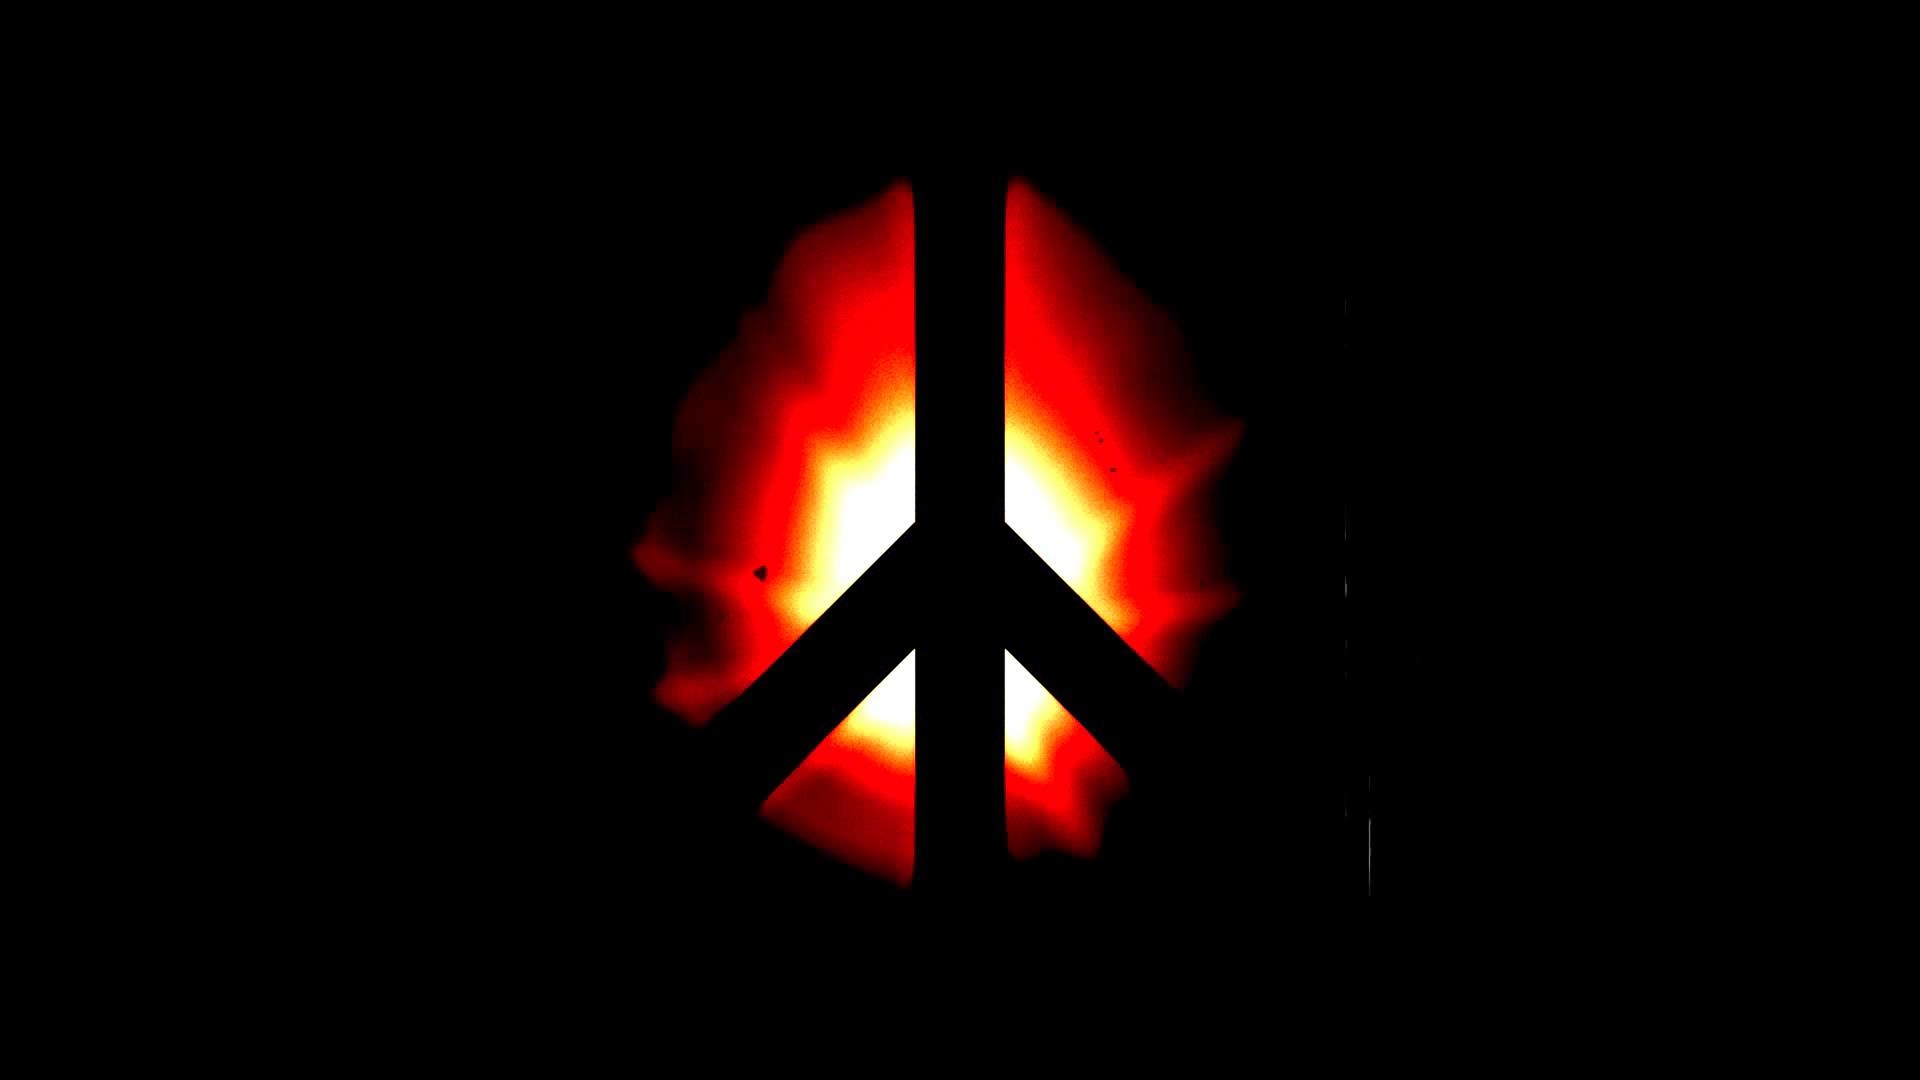 1920x1080 FREE Download HD video backgrounds – abstract black peace sign – grunge  dark style